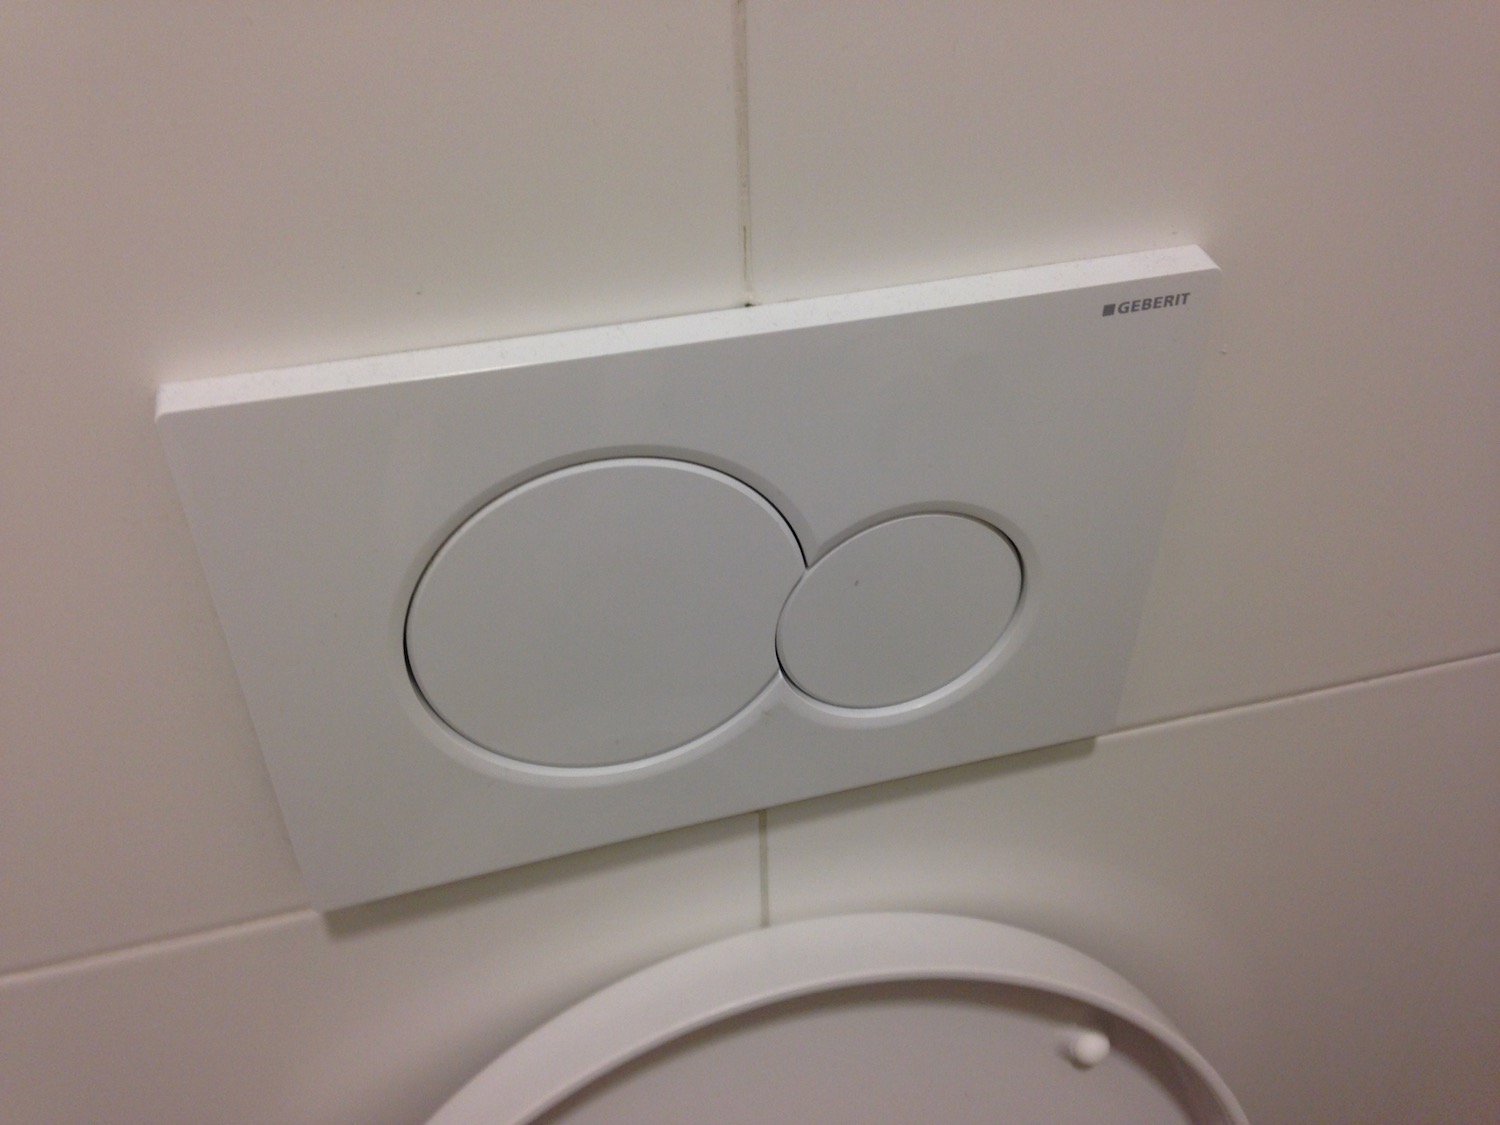 a white toilet with two circular buttons